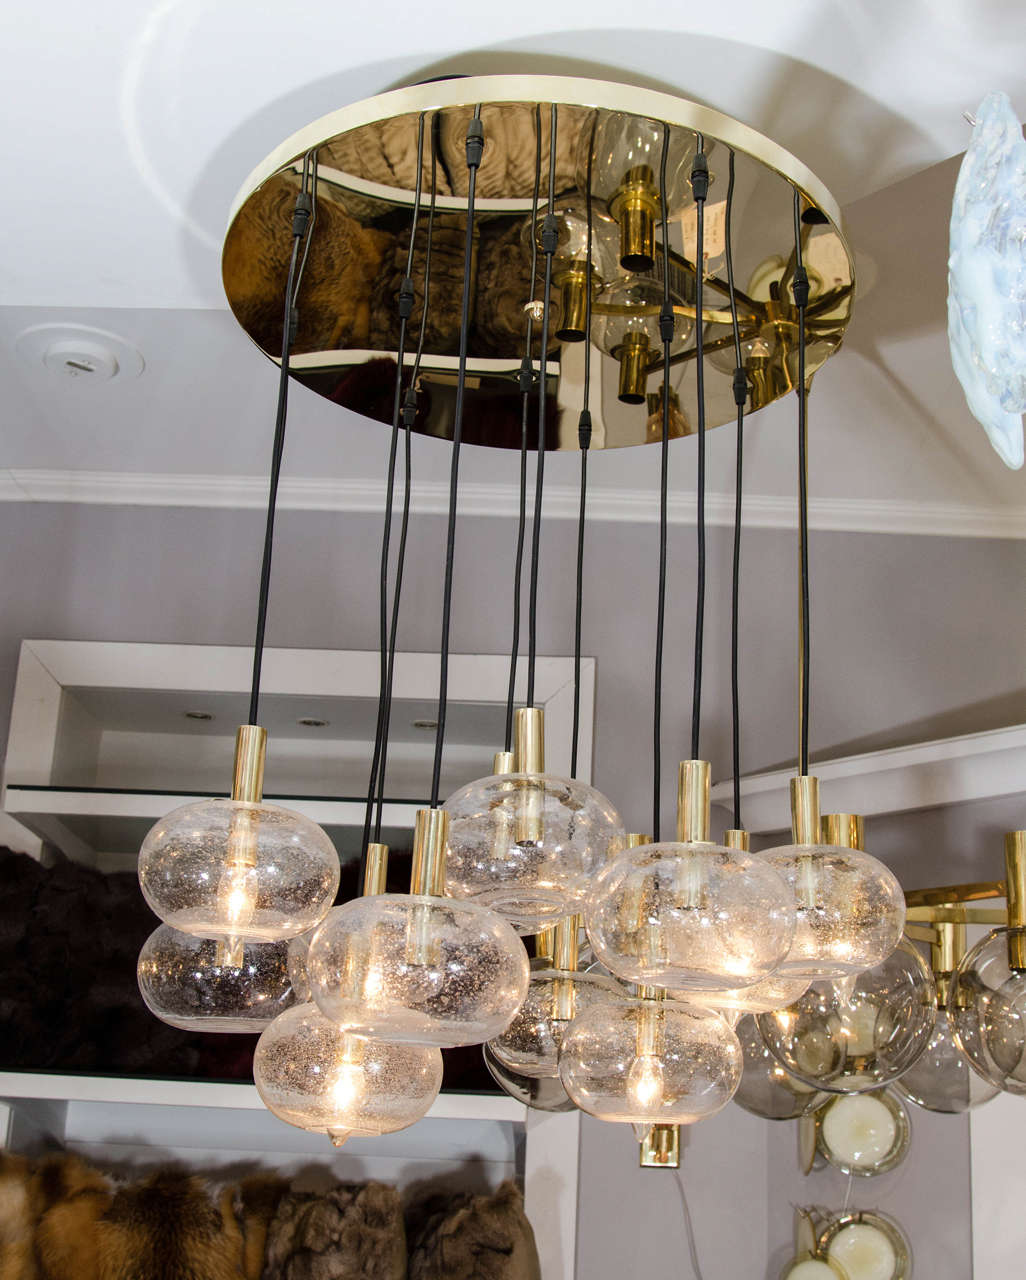 Custom twelve-oval globe chandelier. Customization is available in different sizes and finishes.